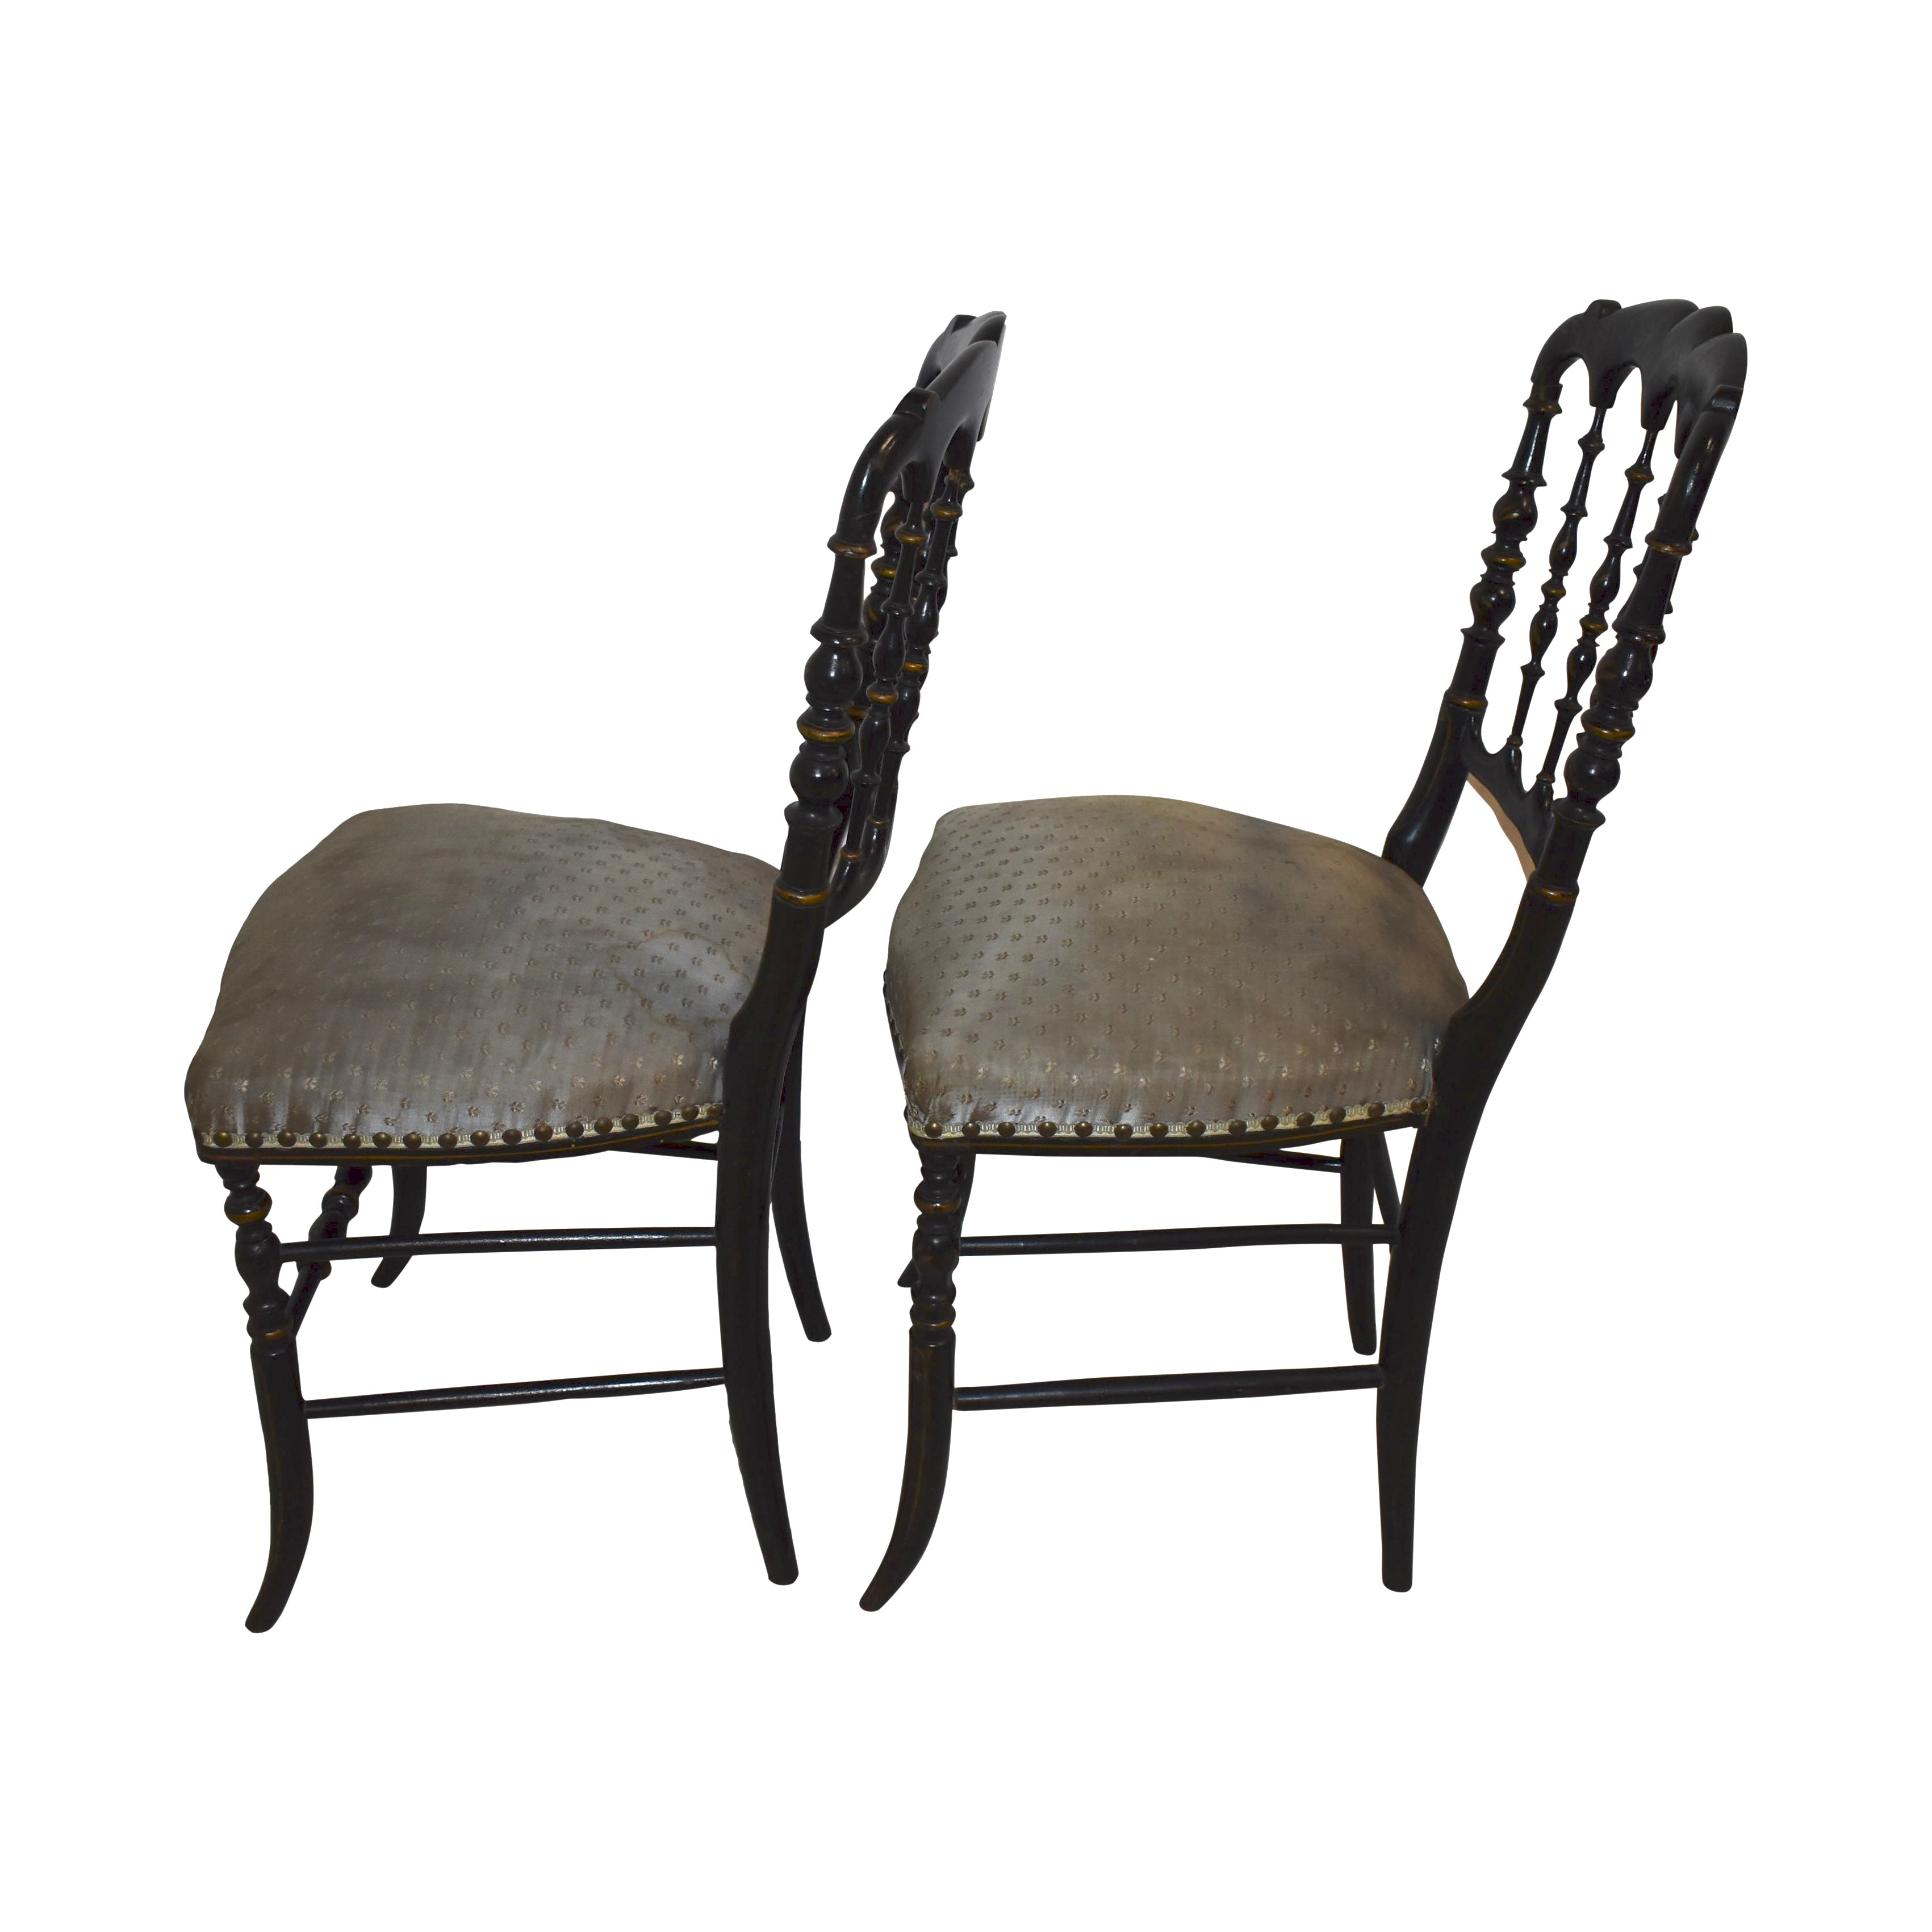 Hand Painted Chairs with Upholsered Seats, Set of Two